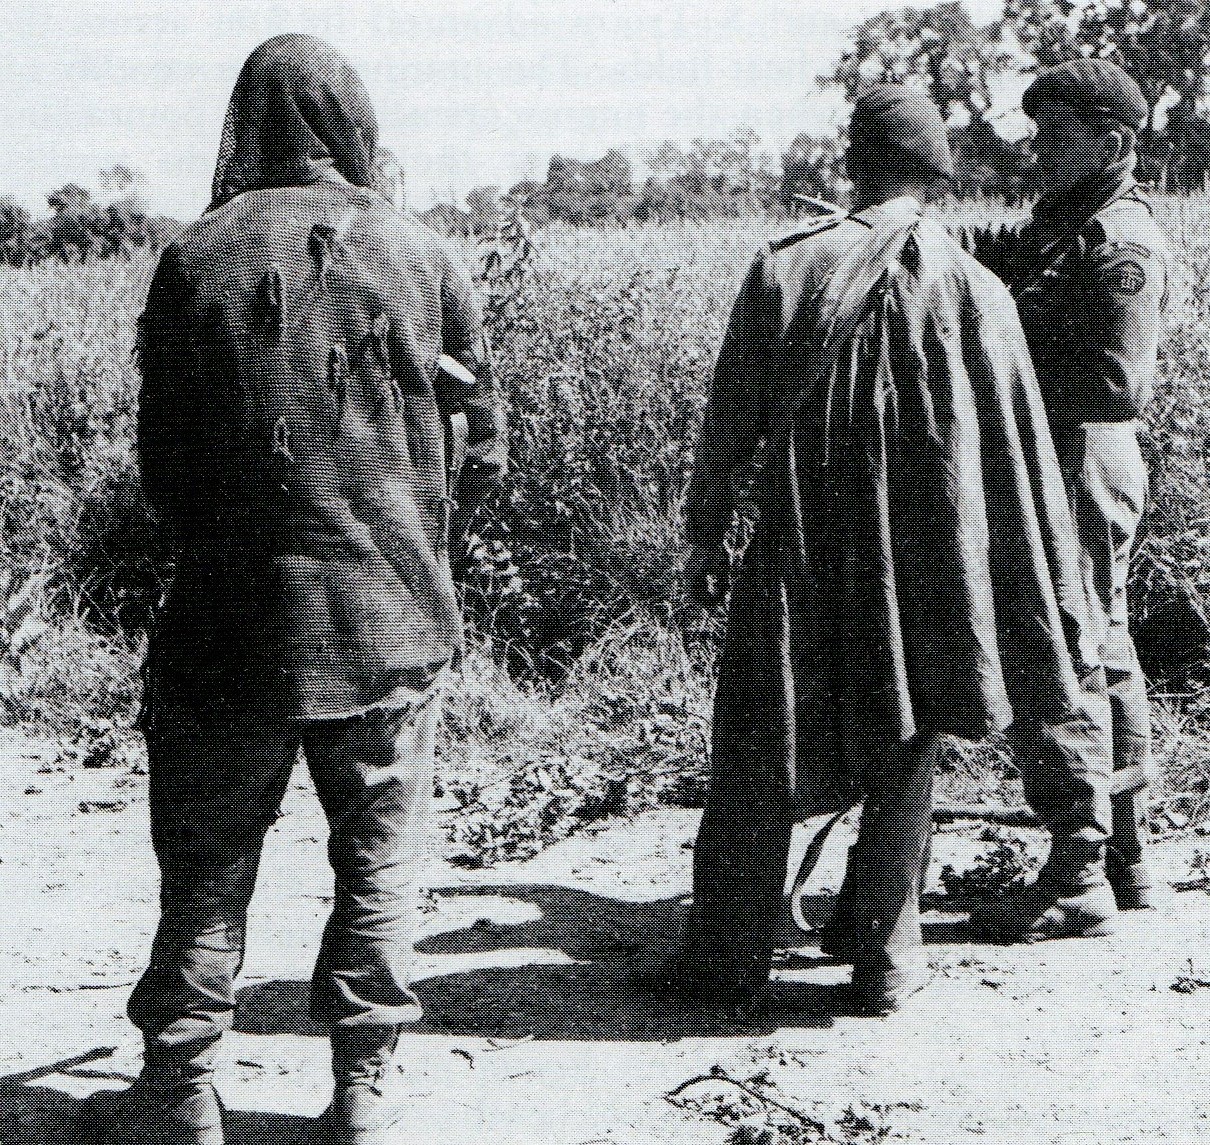 Col Peter Young briefs two snipers, Bernard Machin and Joe Leedham, in the Orne River area, 17th June 1944